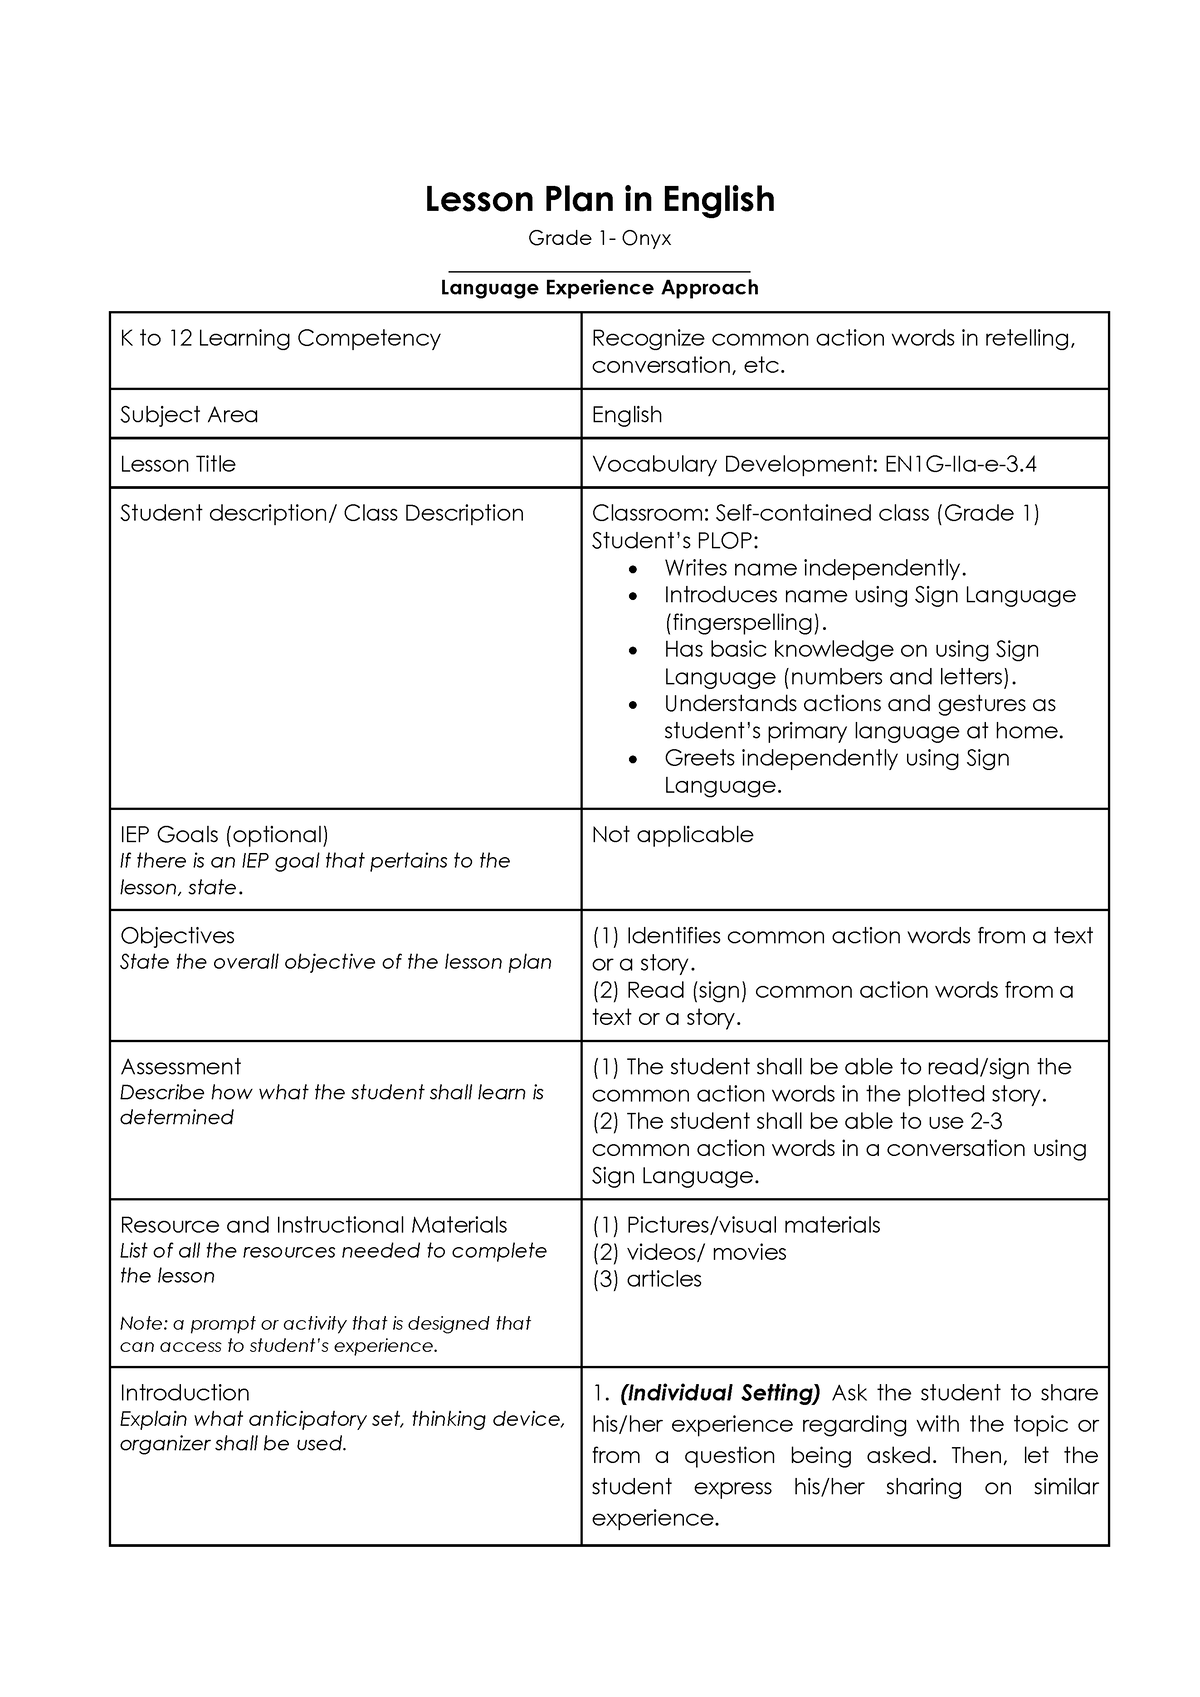 Le1 Lesson Plan Lea Language Experience Approach Lesson Plan In